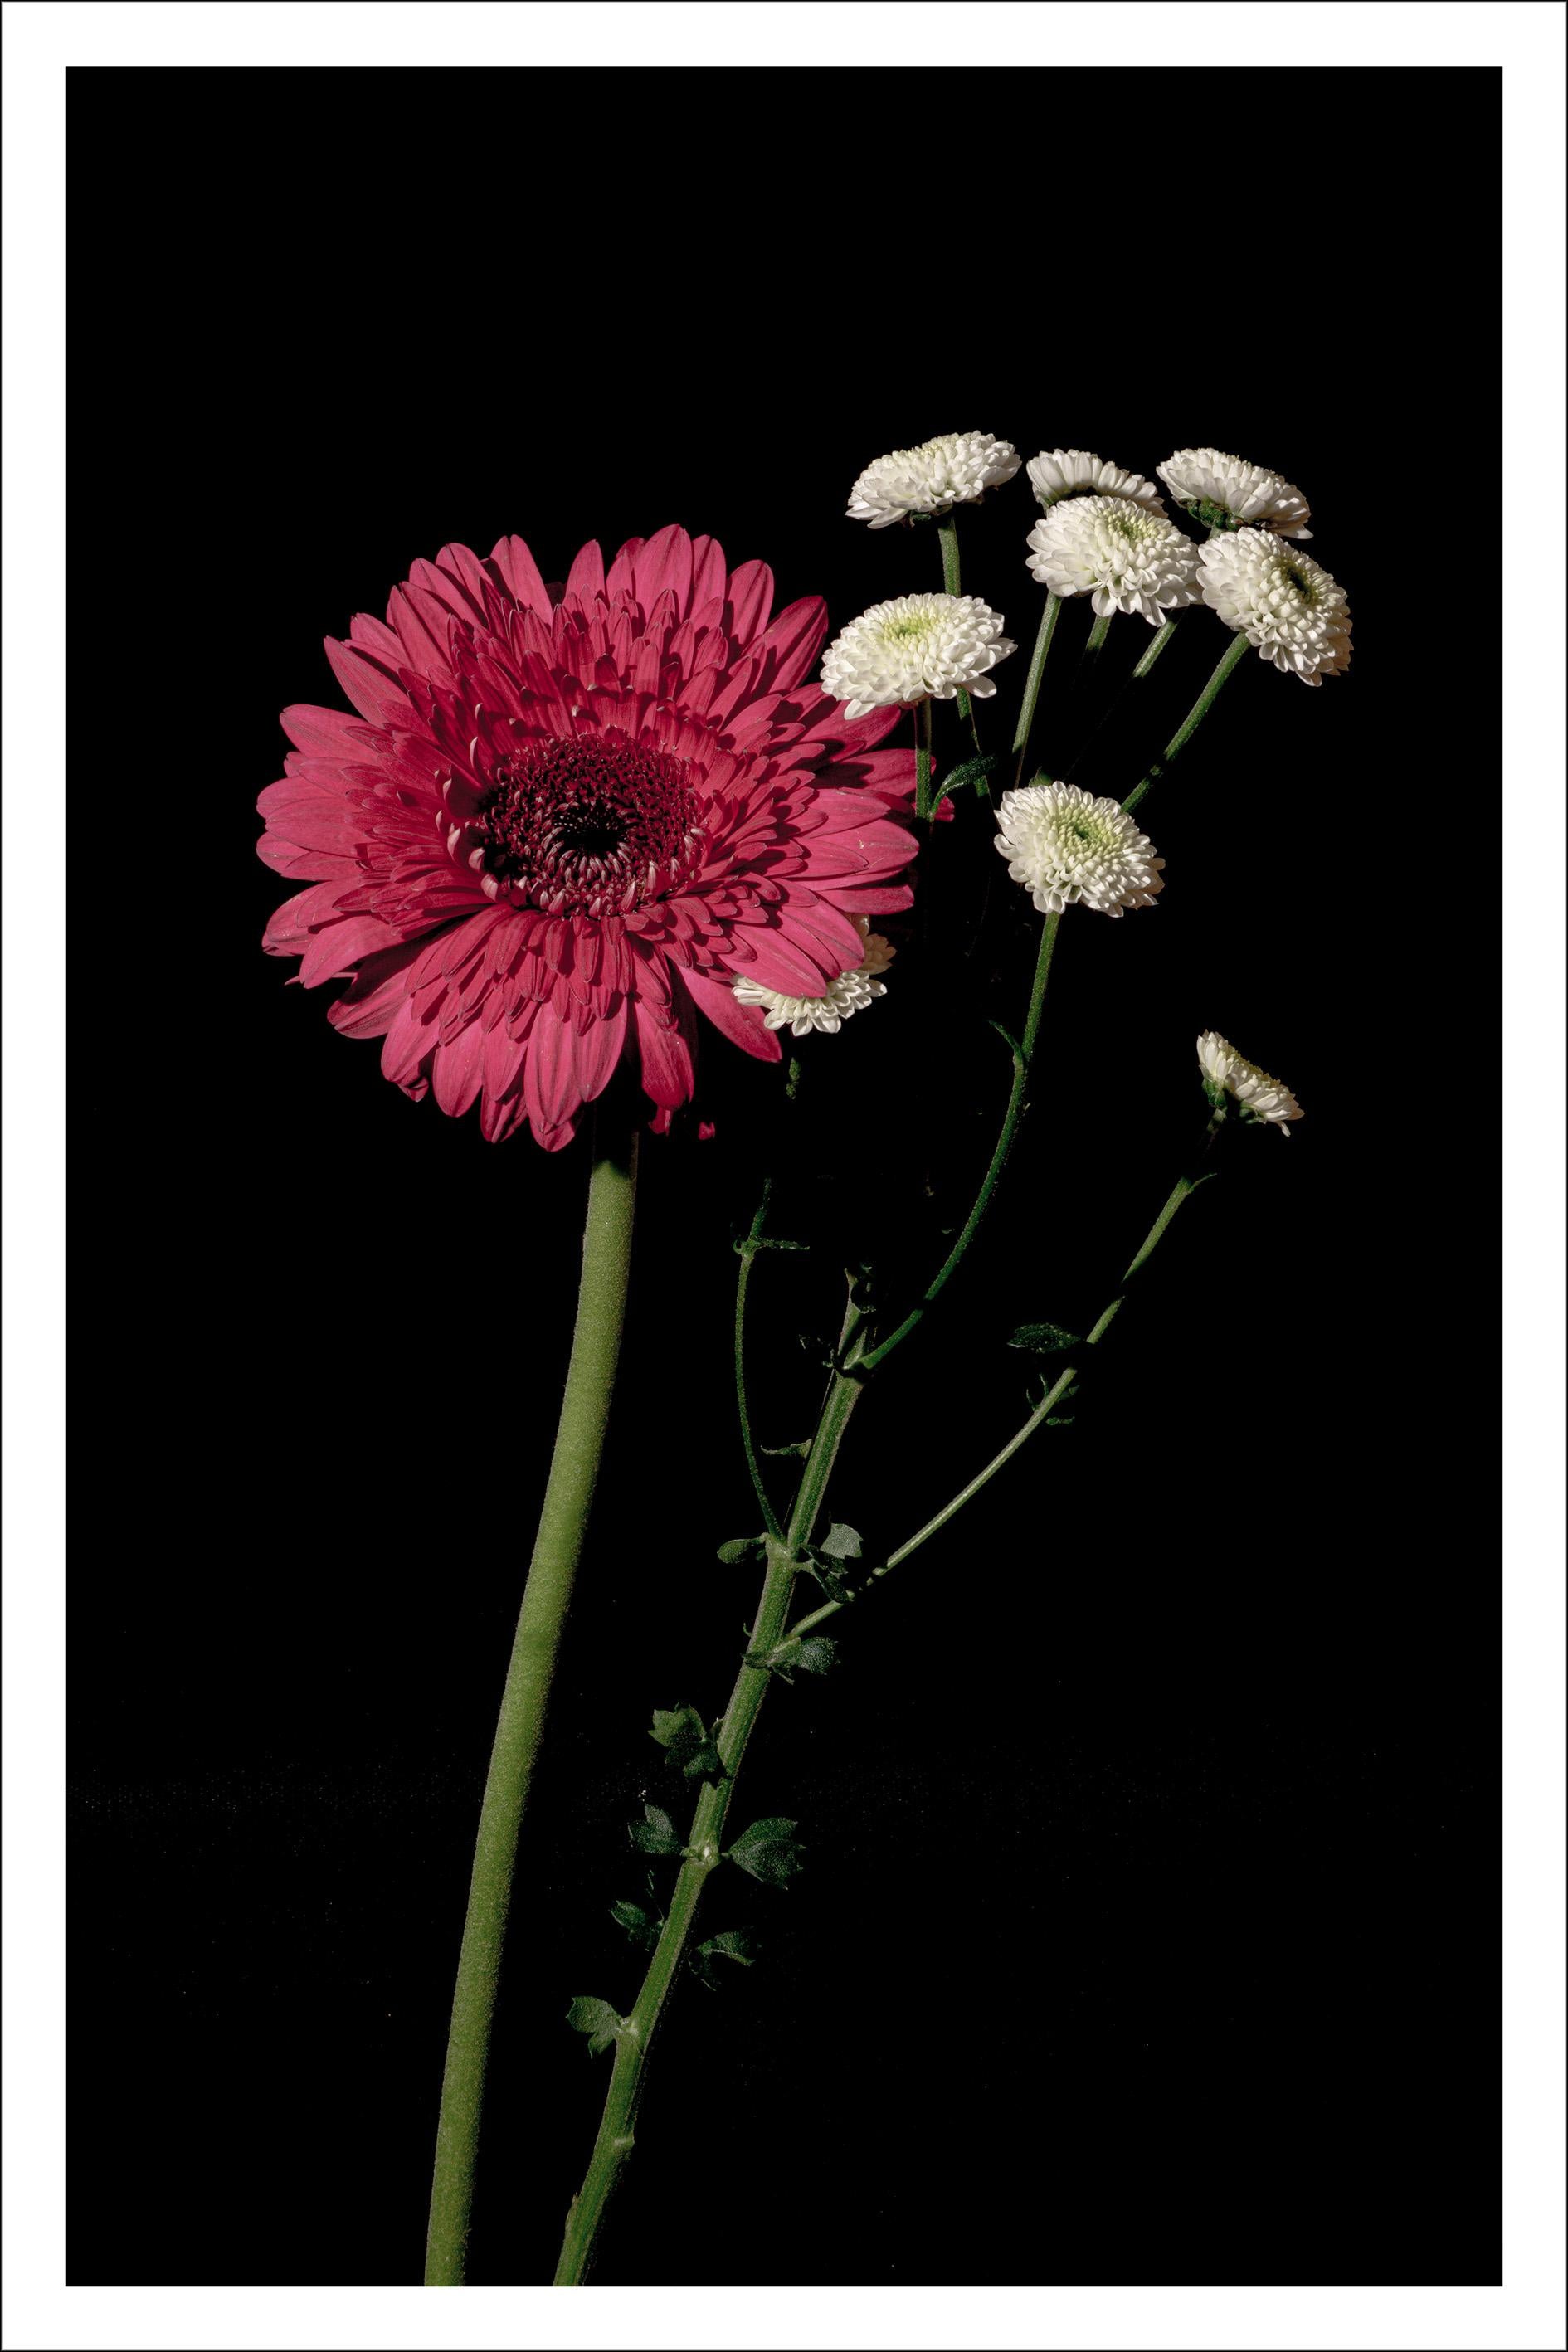 Pink and White Delicate Flowers, Black Background, Bright Elegant Giclée Print